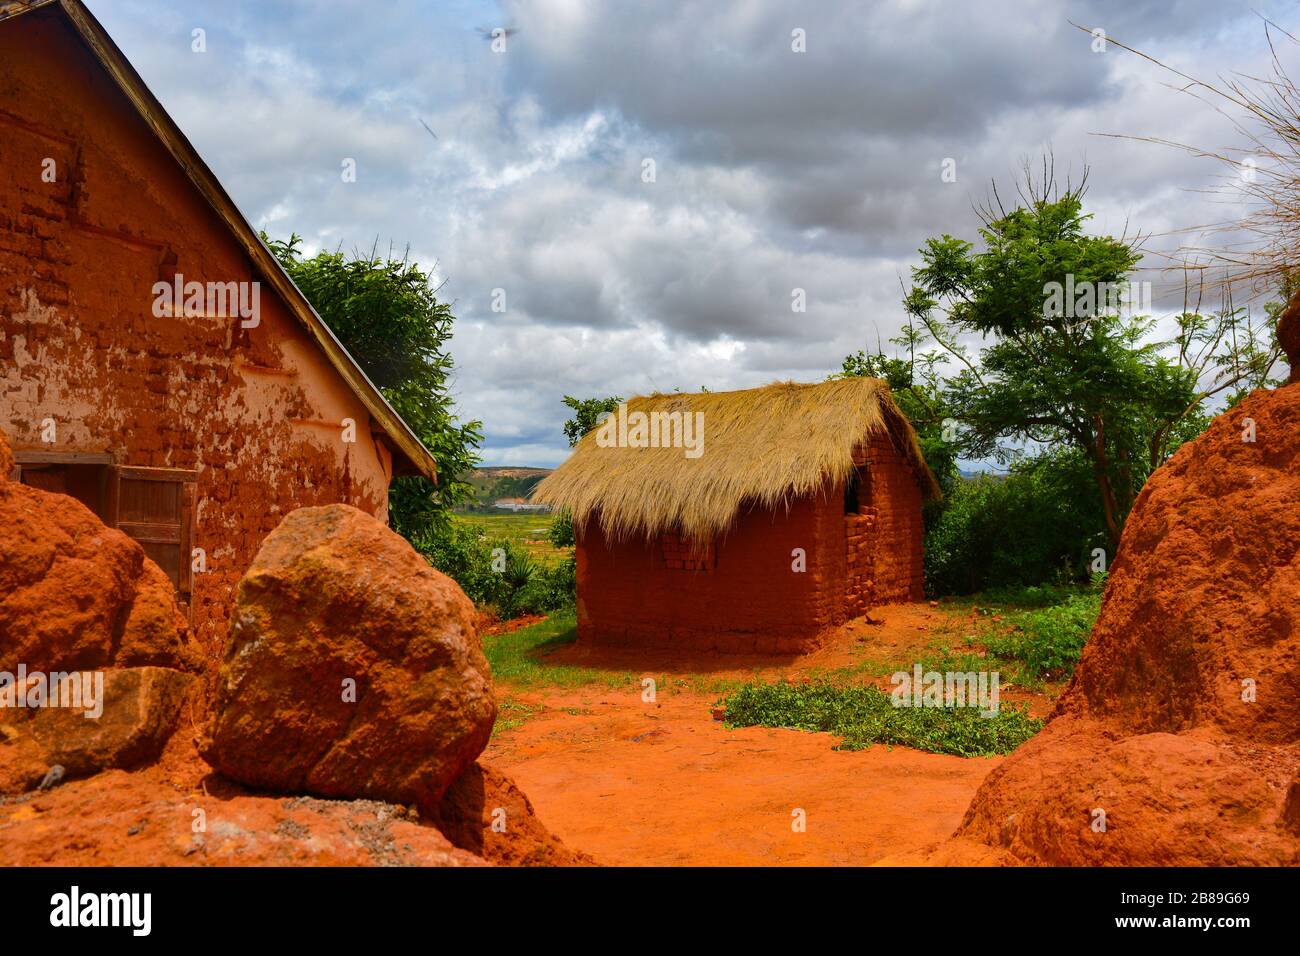 An african orange mudhouse. In a small, remote, madagascan village a basic house with walls made of mud, roof made of straws, dirt road. Cozy home Stock Photo